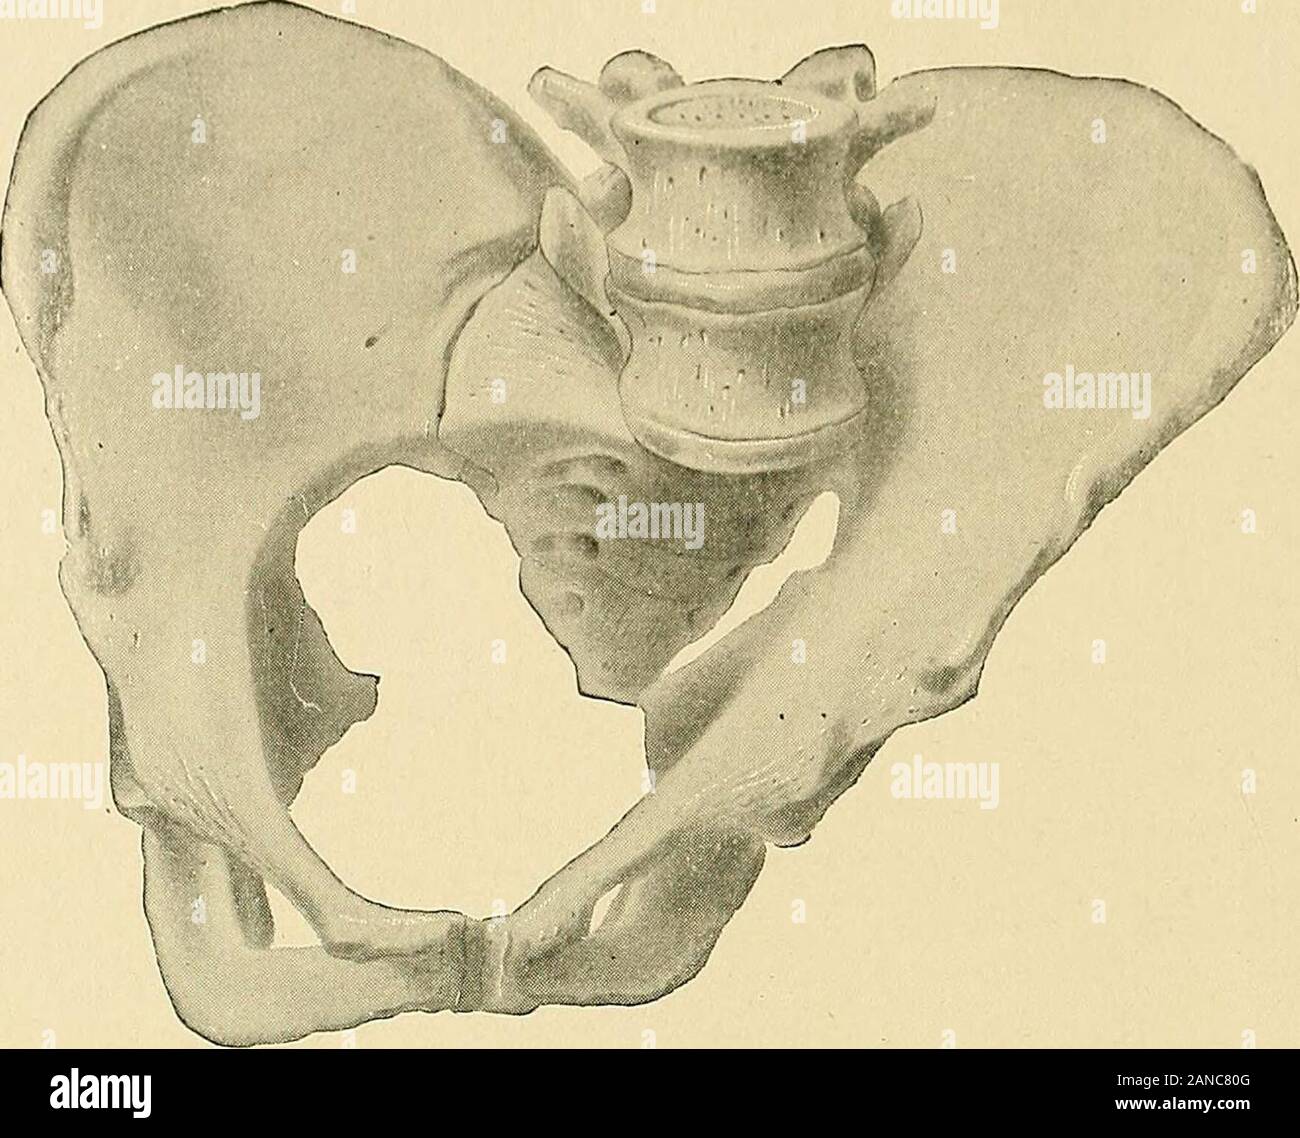 Cesarean section . g. 21.—Pelvis Obliquely Contracted from Tension of Dis-located Femur. head shows no sign of entering the pelvis, the conservative policy shouldbe abandoned and the patient delivered by the abdominal route. Obliquely Contracted, or Nagele Pelvis.—This form of contractedpelvis is of very rare occurrence, but causes serious dystocia in the ma-jority of instances, when found. The main characteristics are an obliquecontraction, involving both the brim and outlet, combined in most caseswith ankylosis of the sacro-iliac joint on the affected side. The causeof the pelvic deformity i Stock Photo